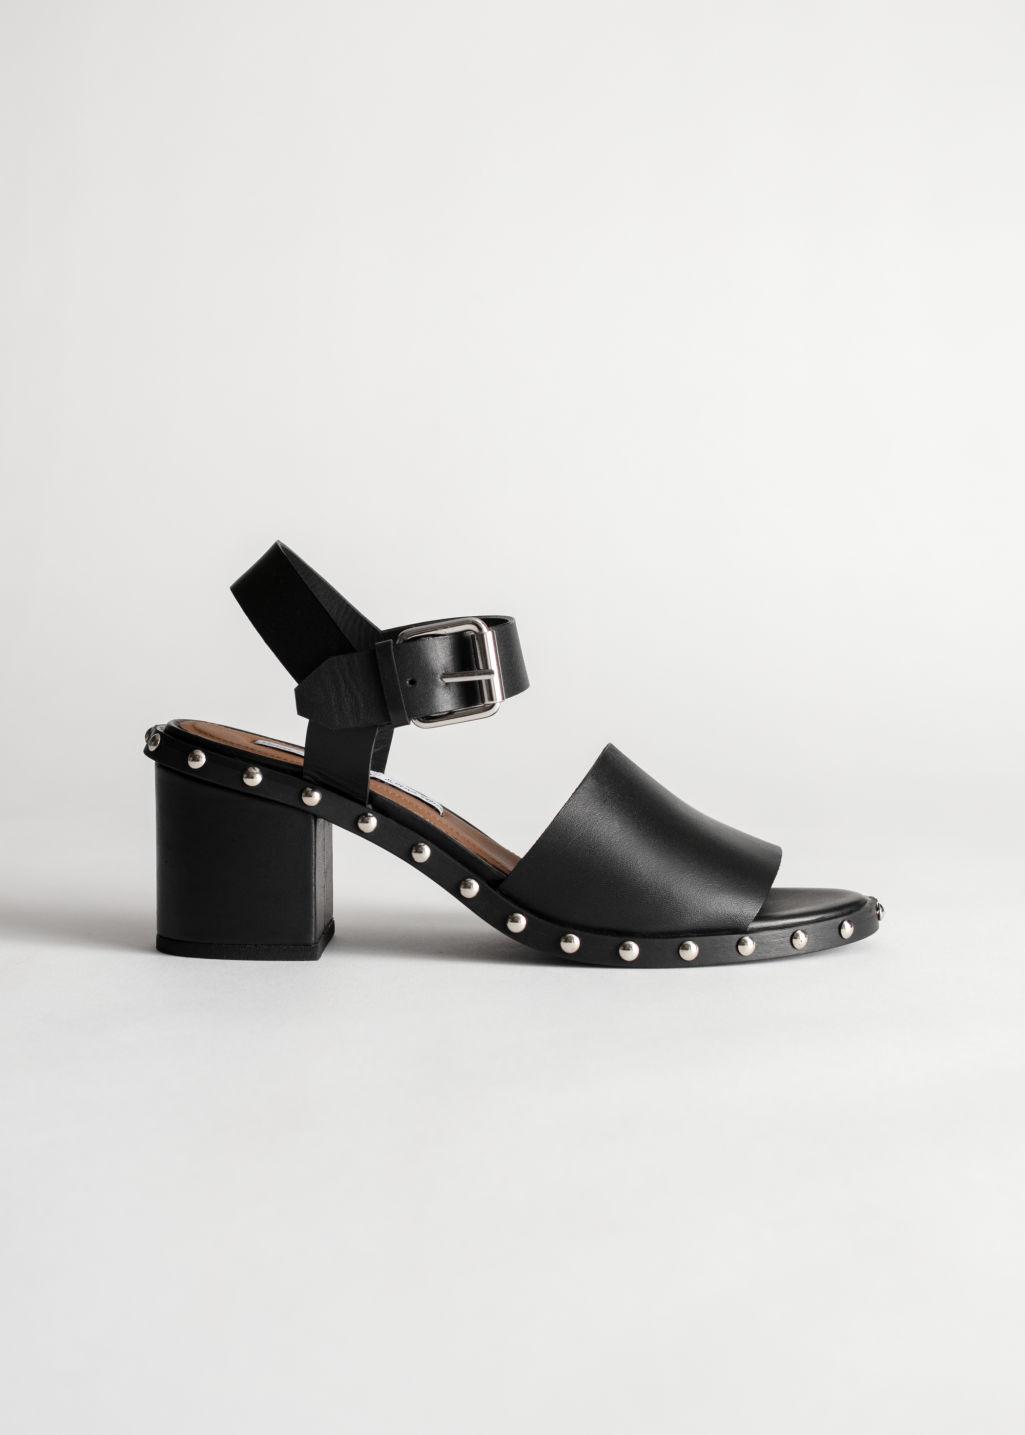 & Other Stories Studded Leather Heeled Sandals in Black - Lyst